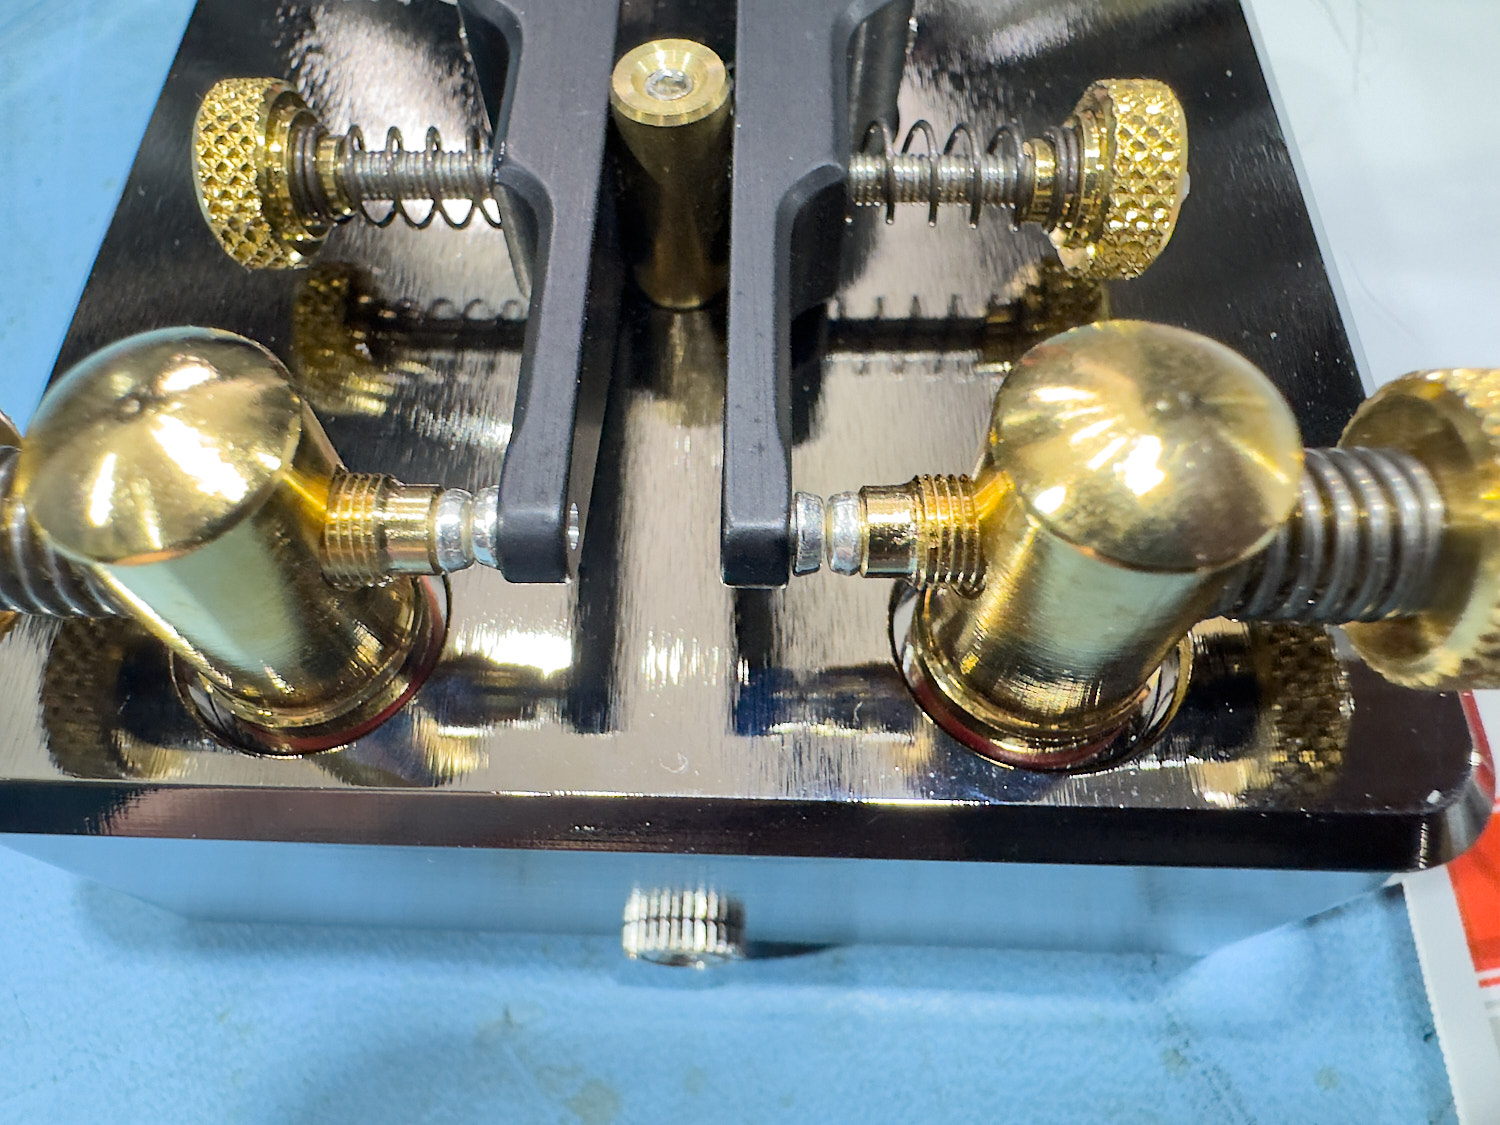 Another Close-up of the contacts on the Begali Simplex Palladium Morse Key